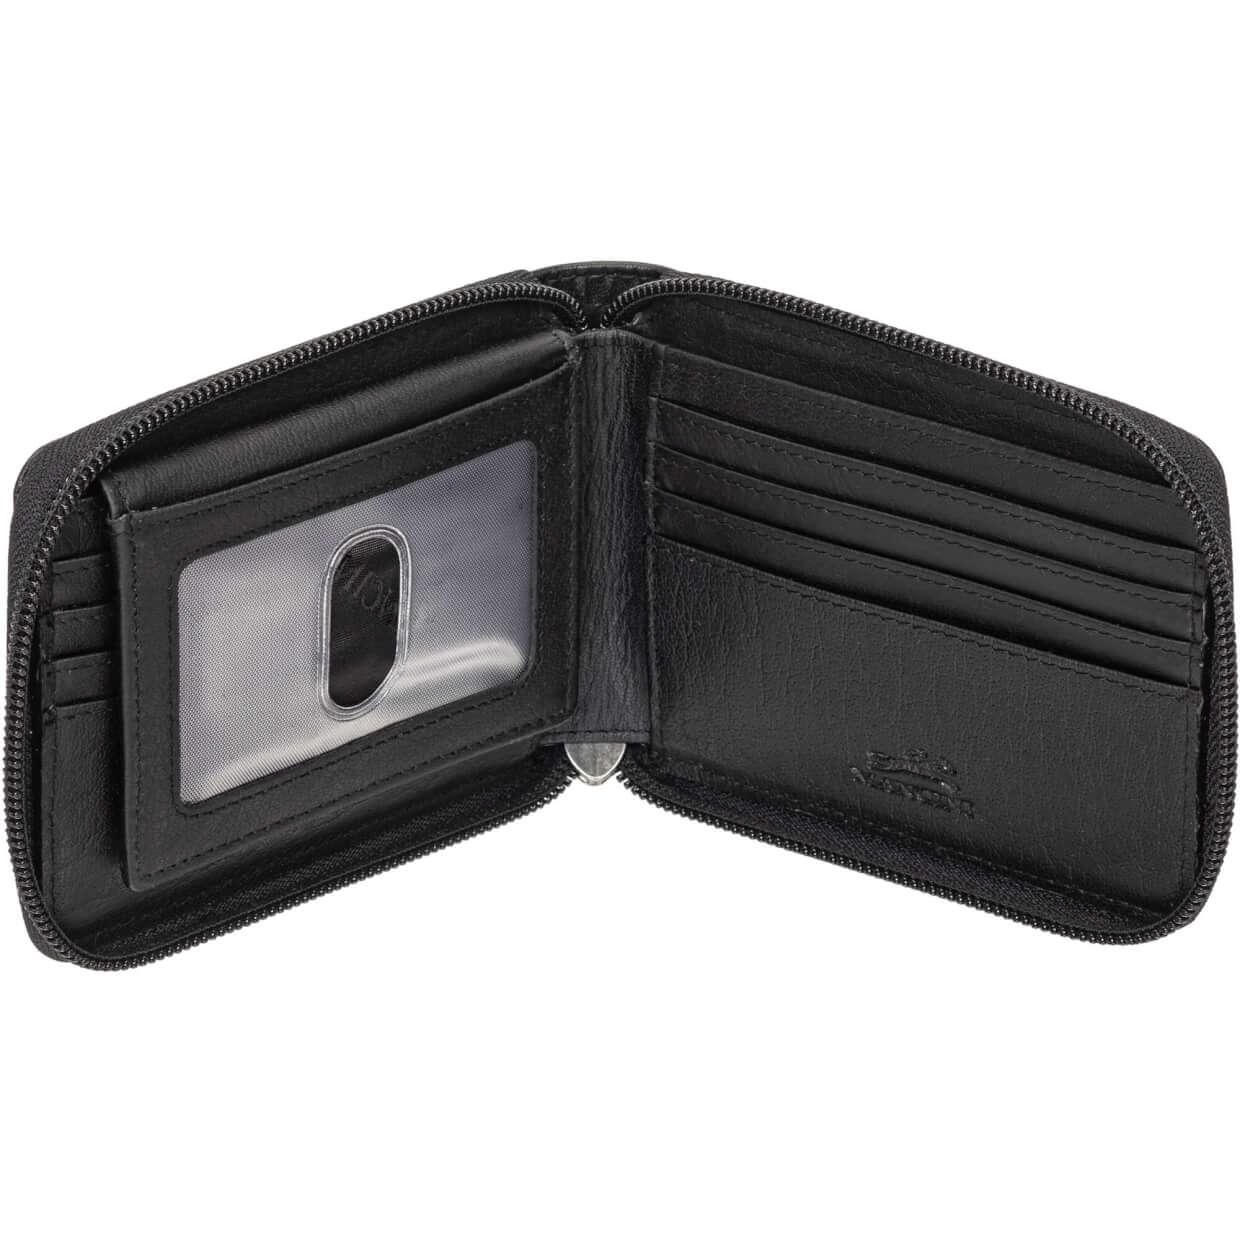 Mancini BUFFALO RFID Secure Zippered Billfold with Removable Passcase